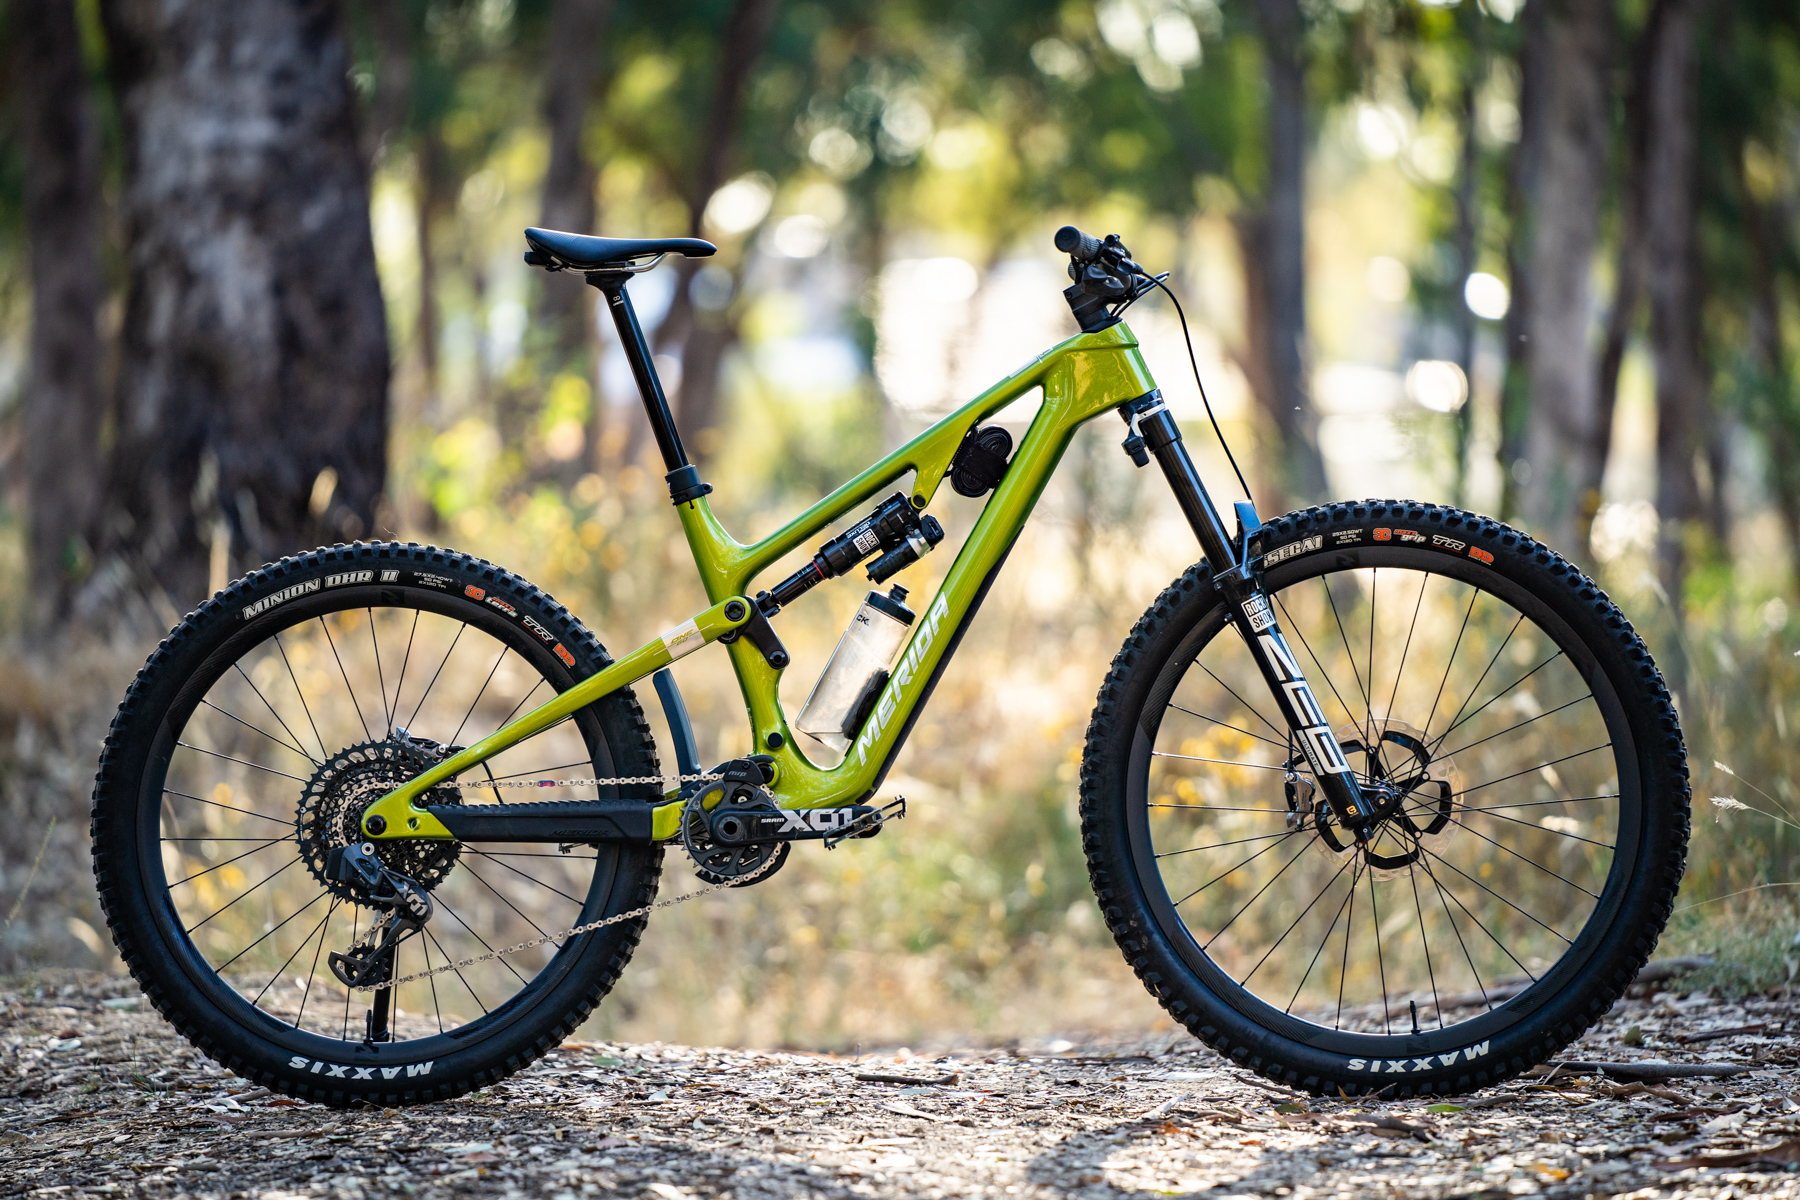 The Merida One-Sixty ranks right up there amongst our best enduro mountain bike shootout 